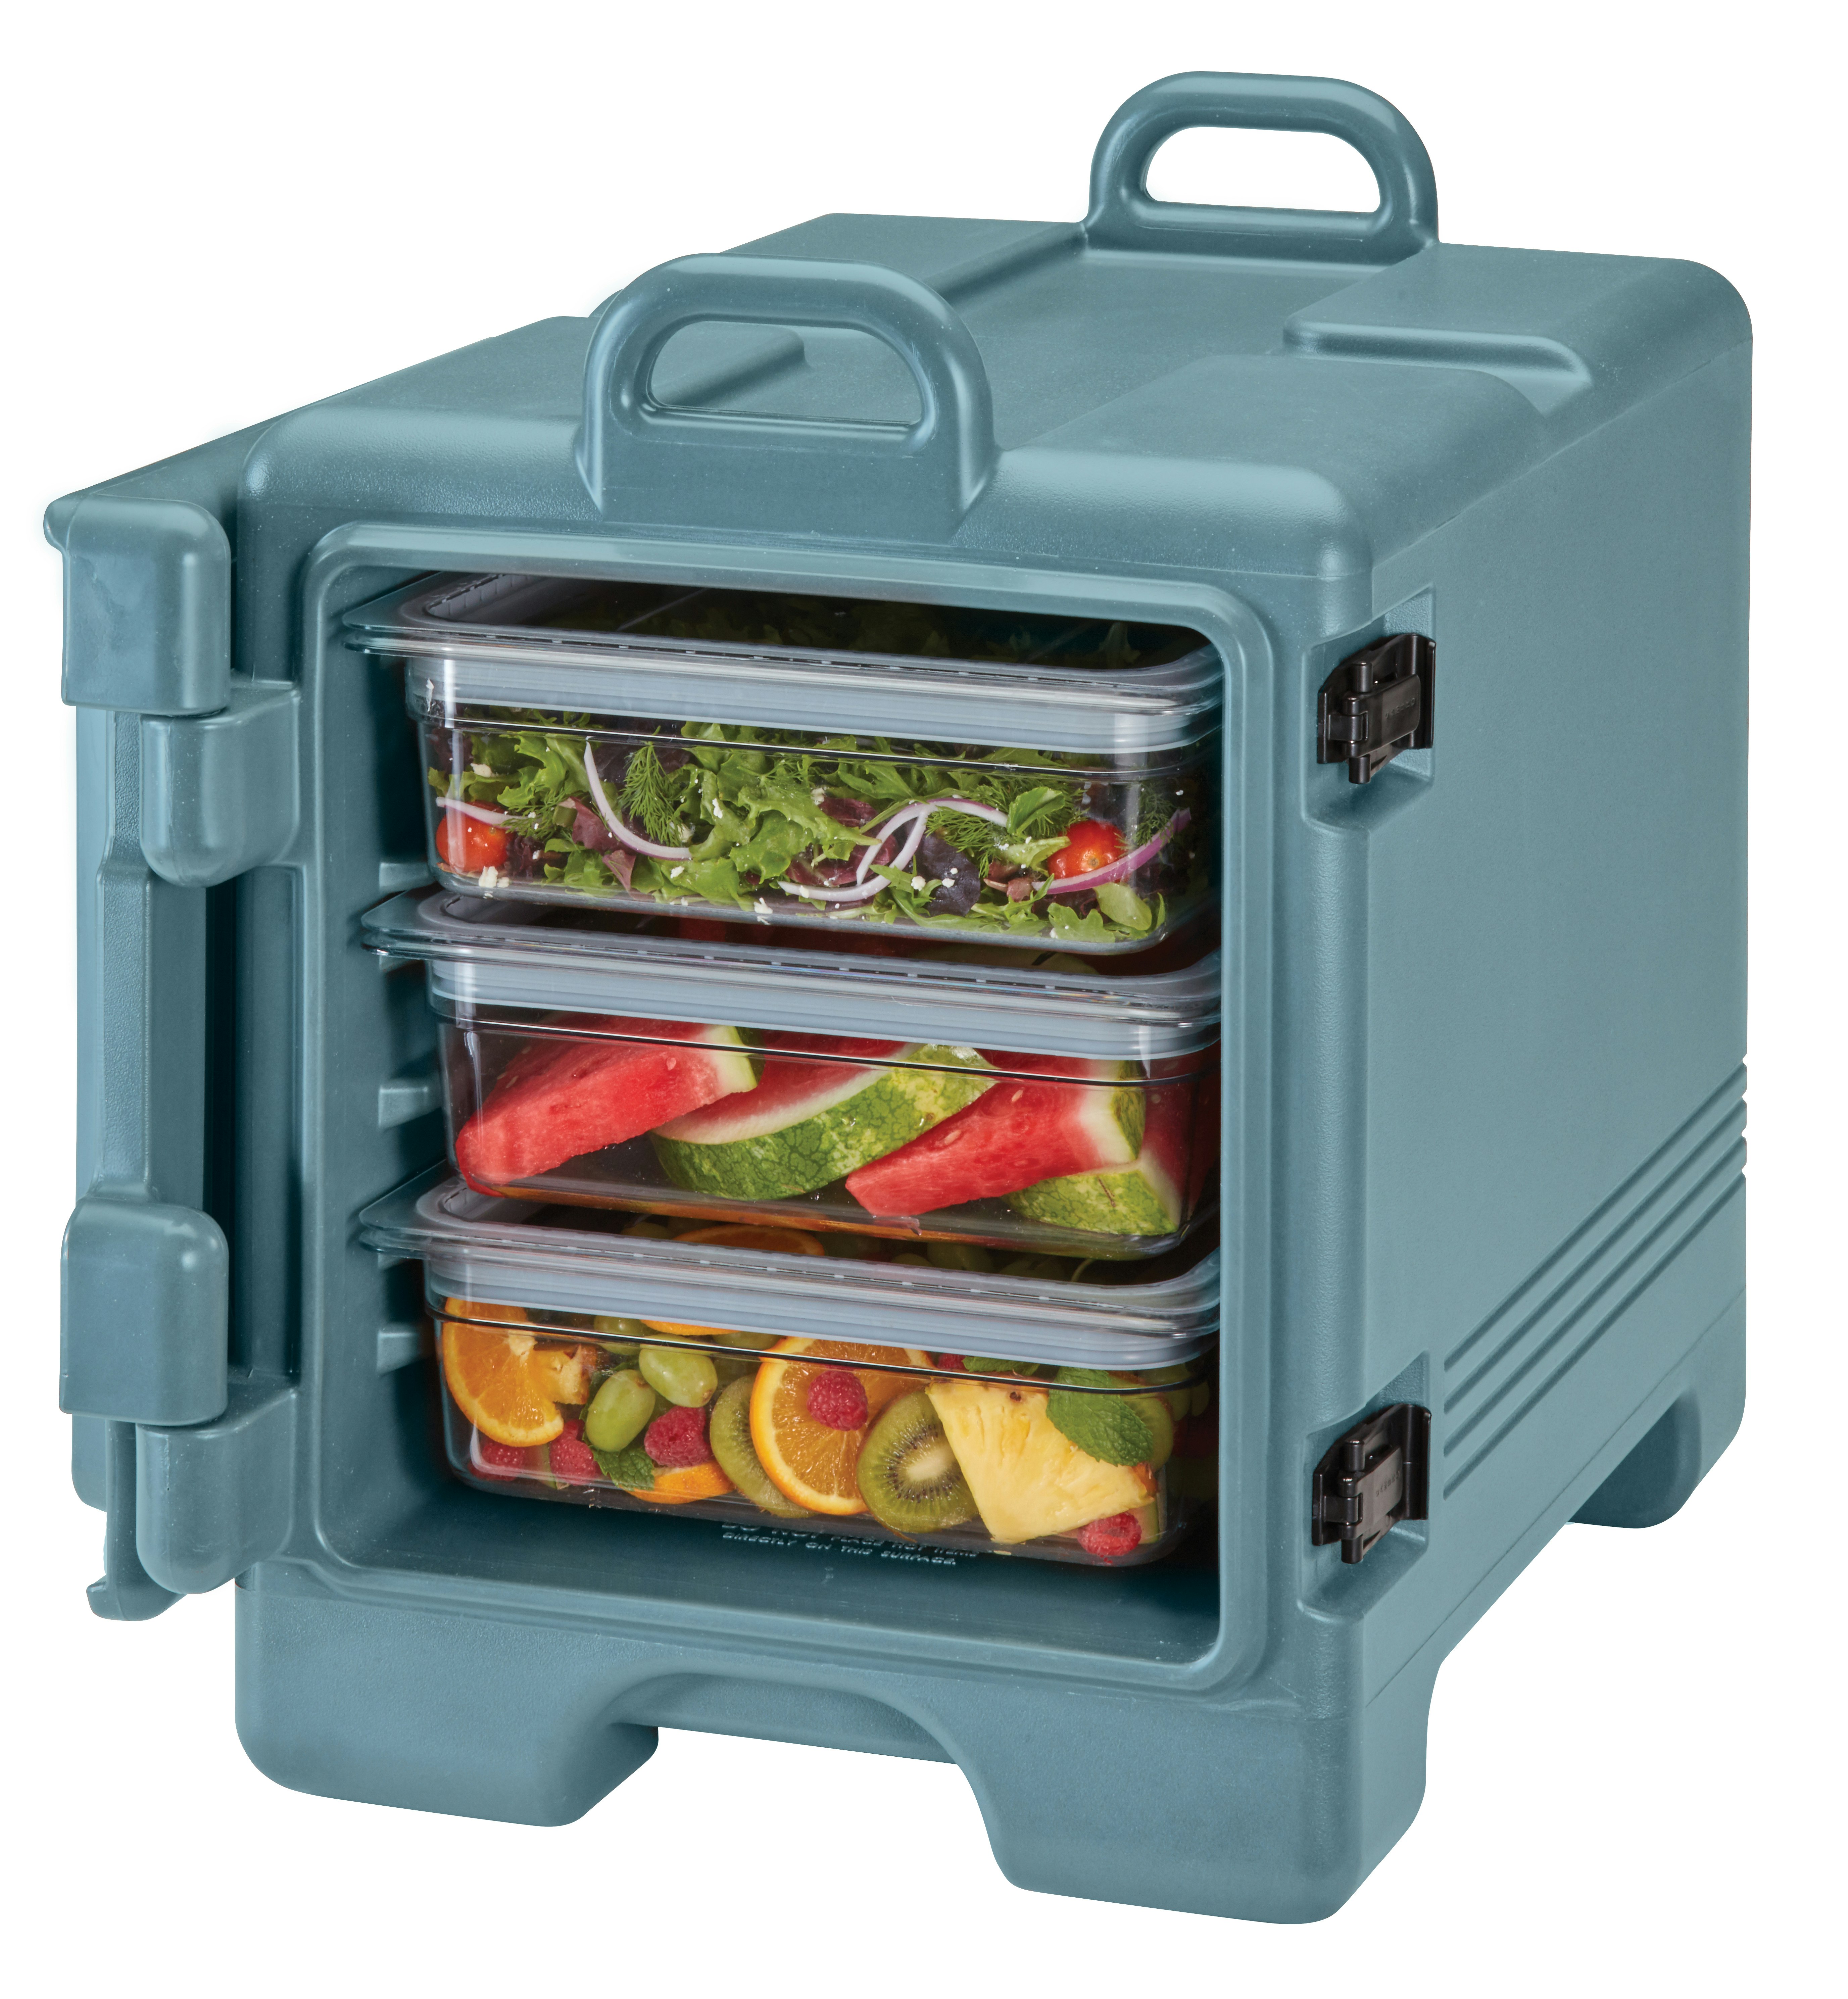 https://cambro-dam.imgix.net/PU0DO3EZ/as/pbev8h-9slha0-ao95c2/UPC300401_Slate_Blue_Front_Loader_Insulated_Carrier_w_Food_Pans.jpg?dl